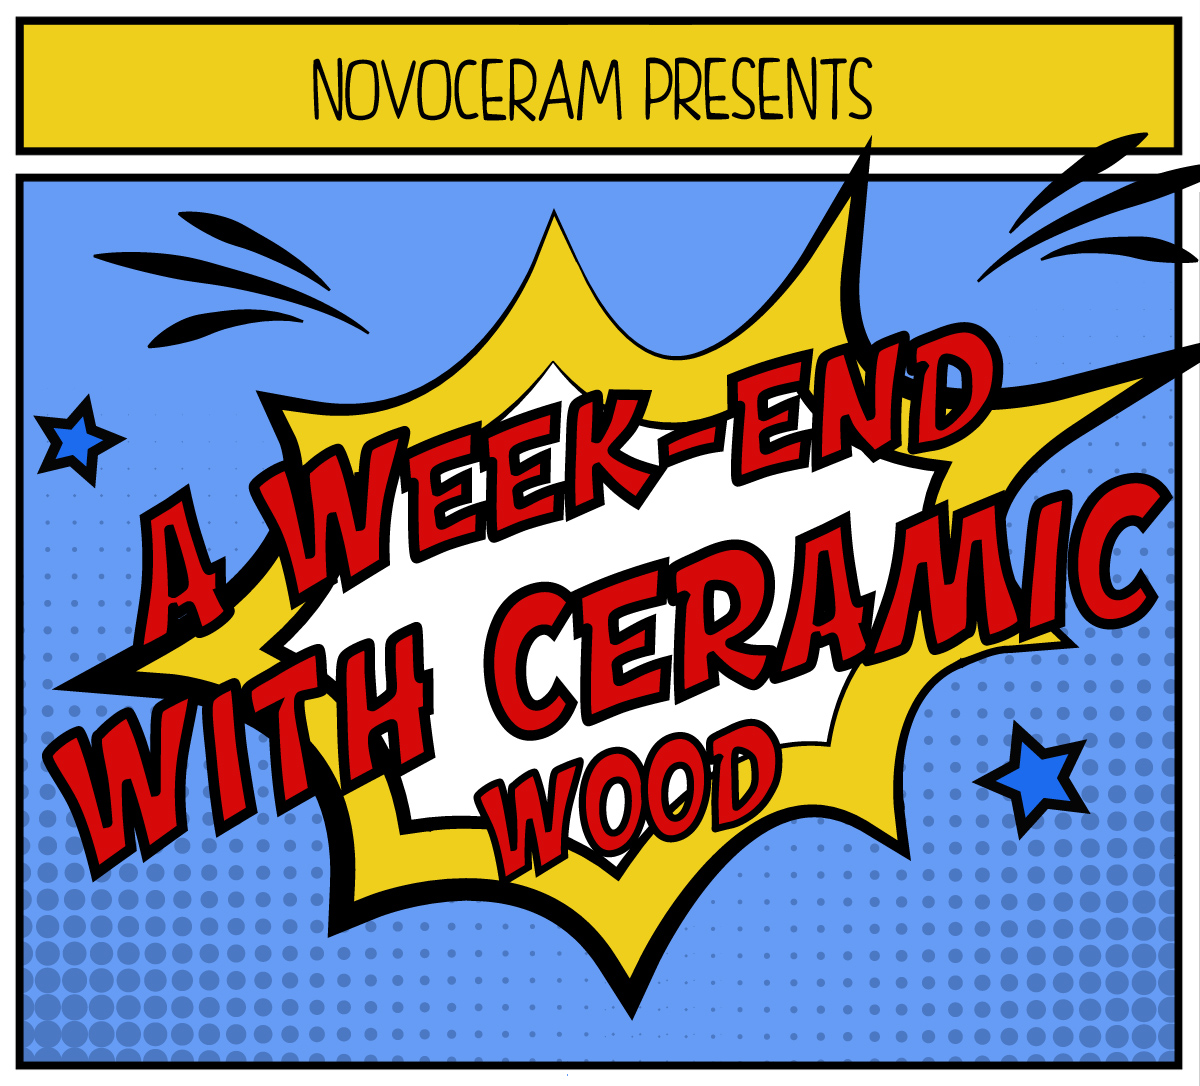 A Week-end with Ceramic Wood